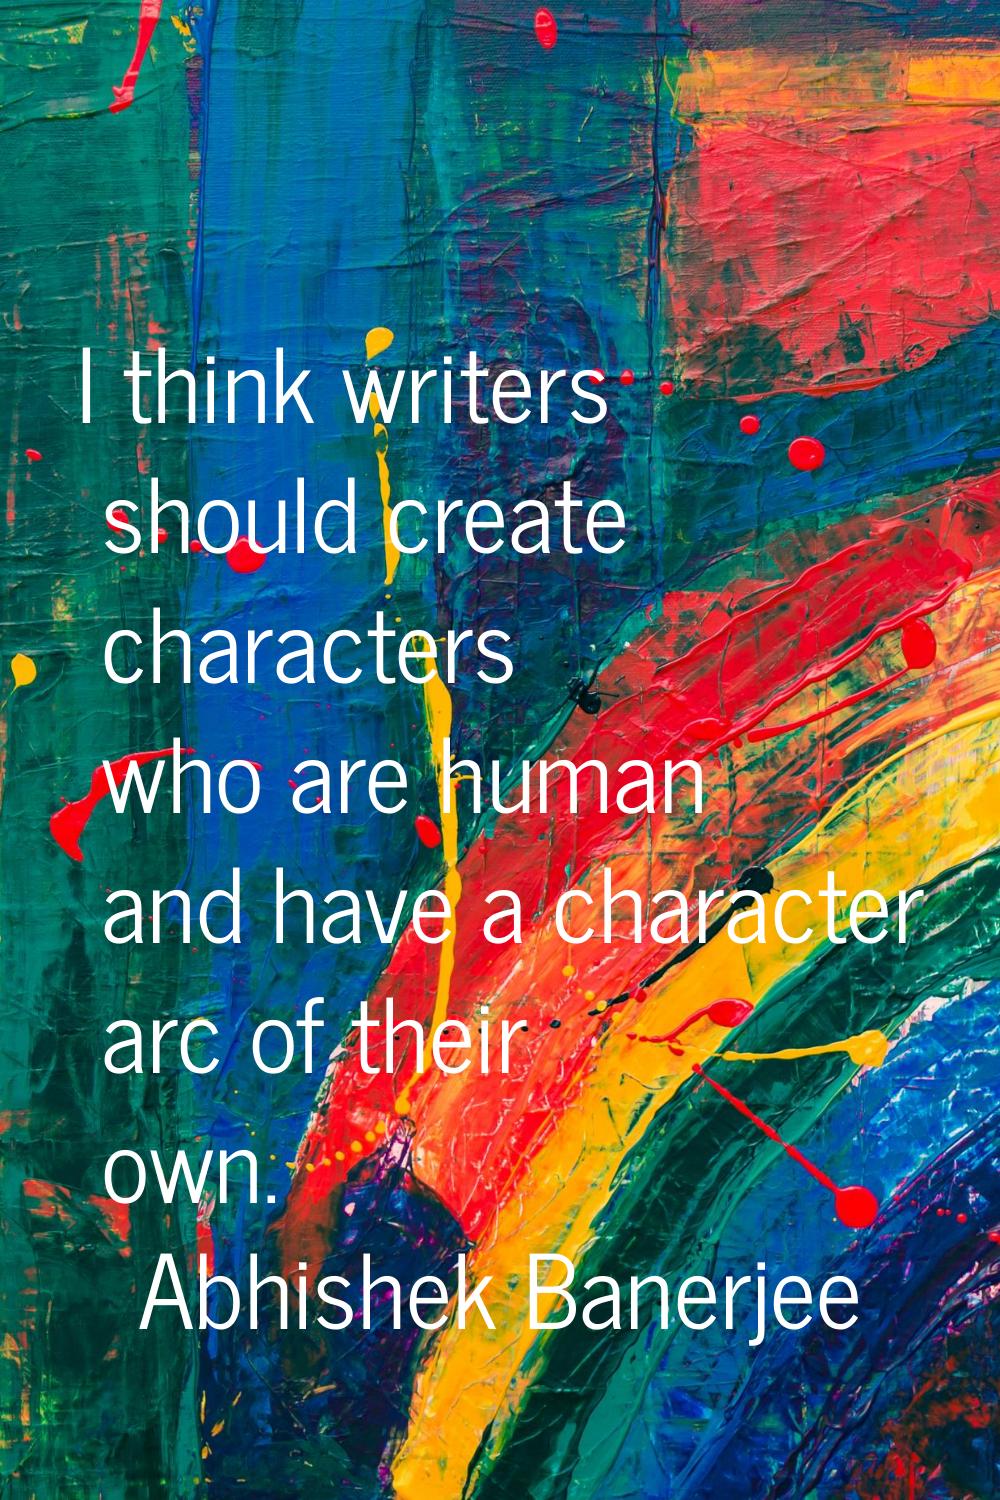 I think writers should create characters who are human and have a character arc of their own.